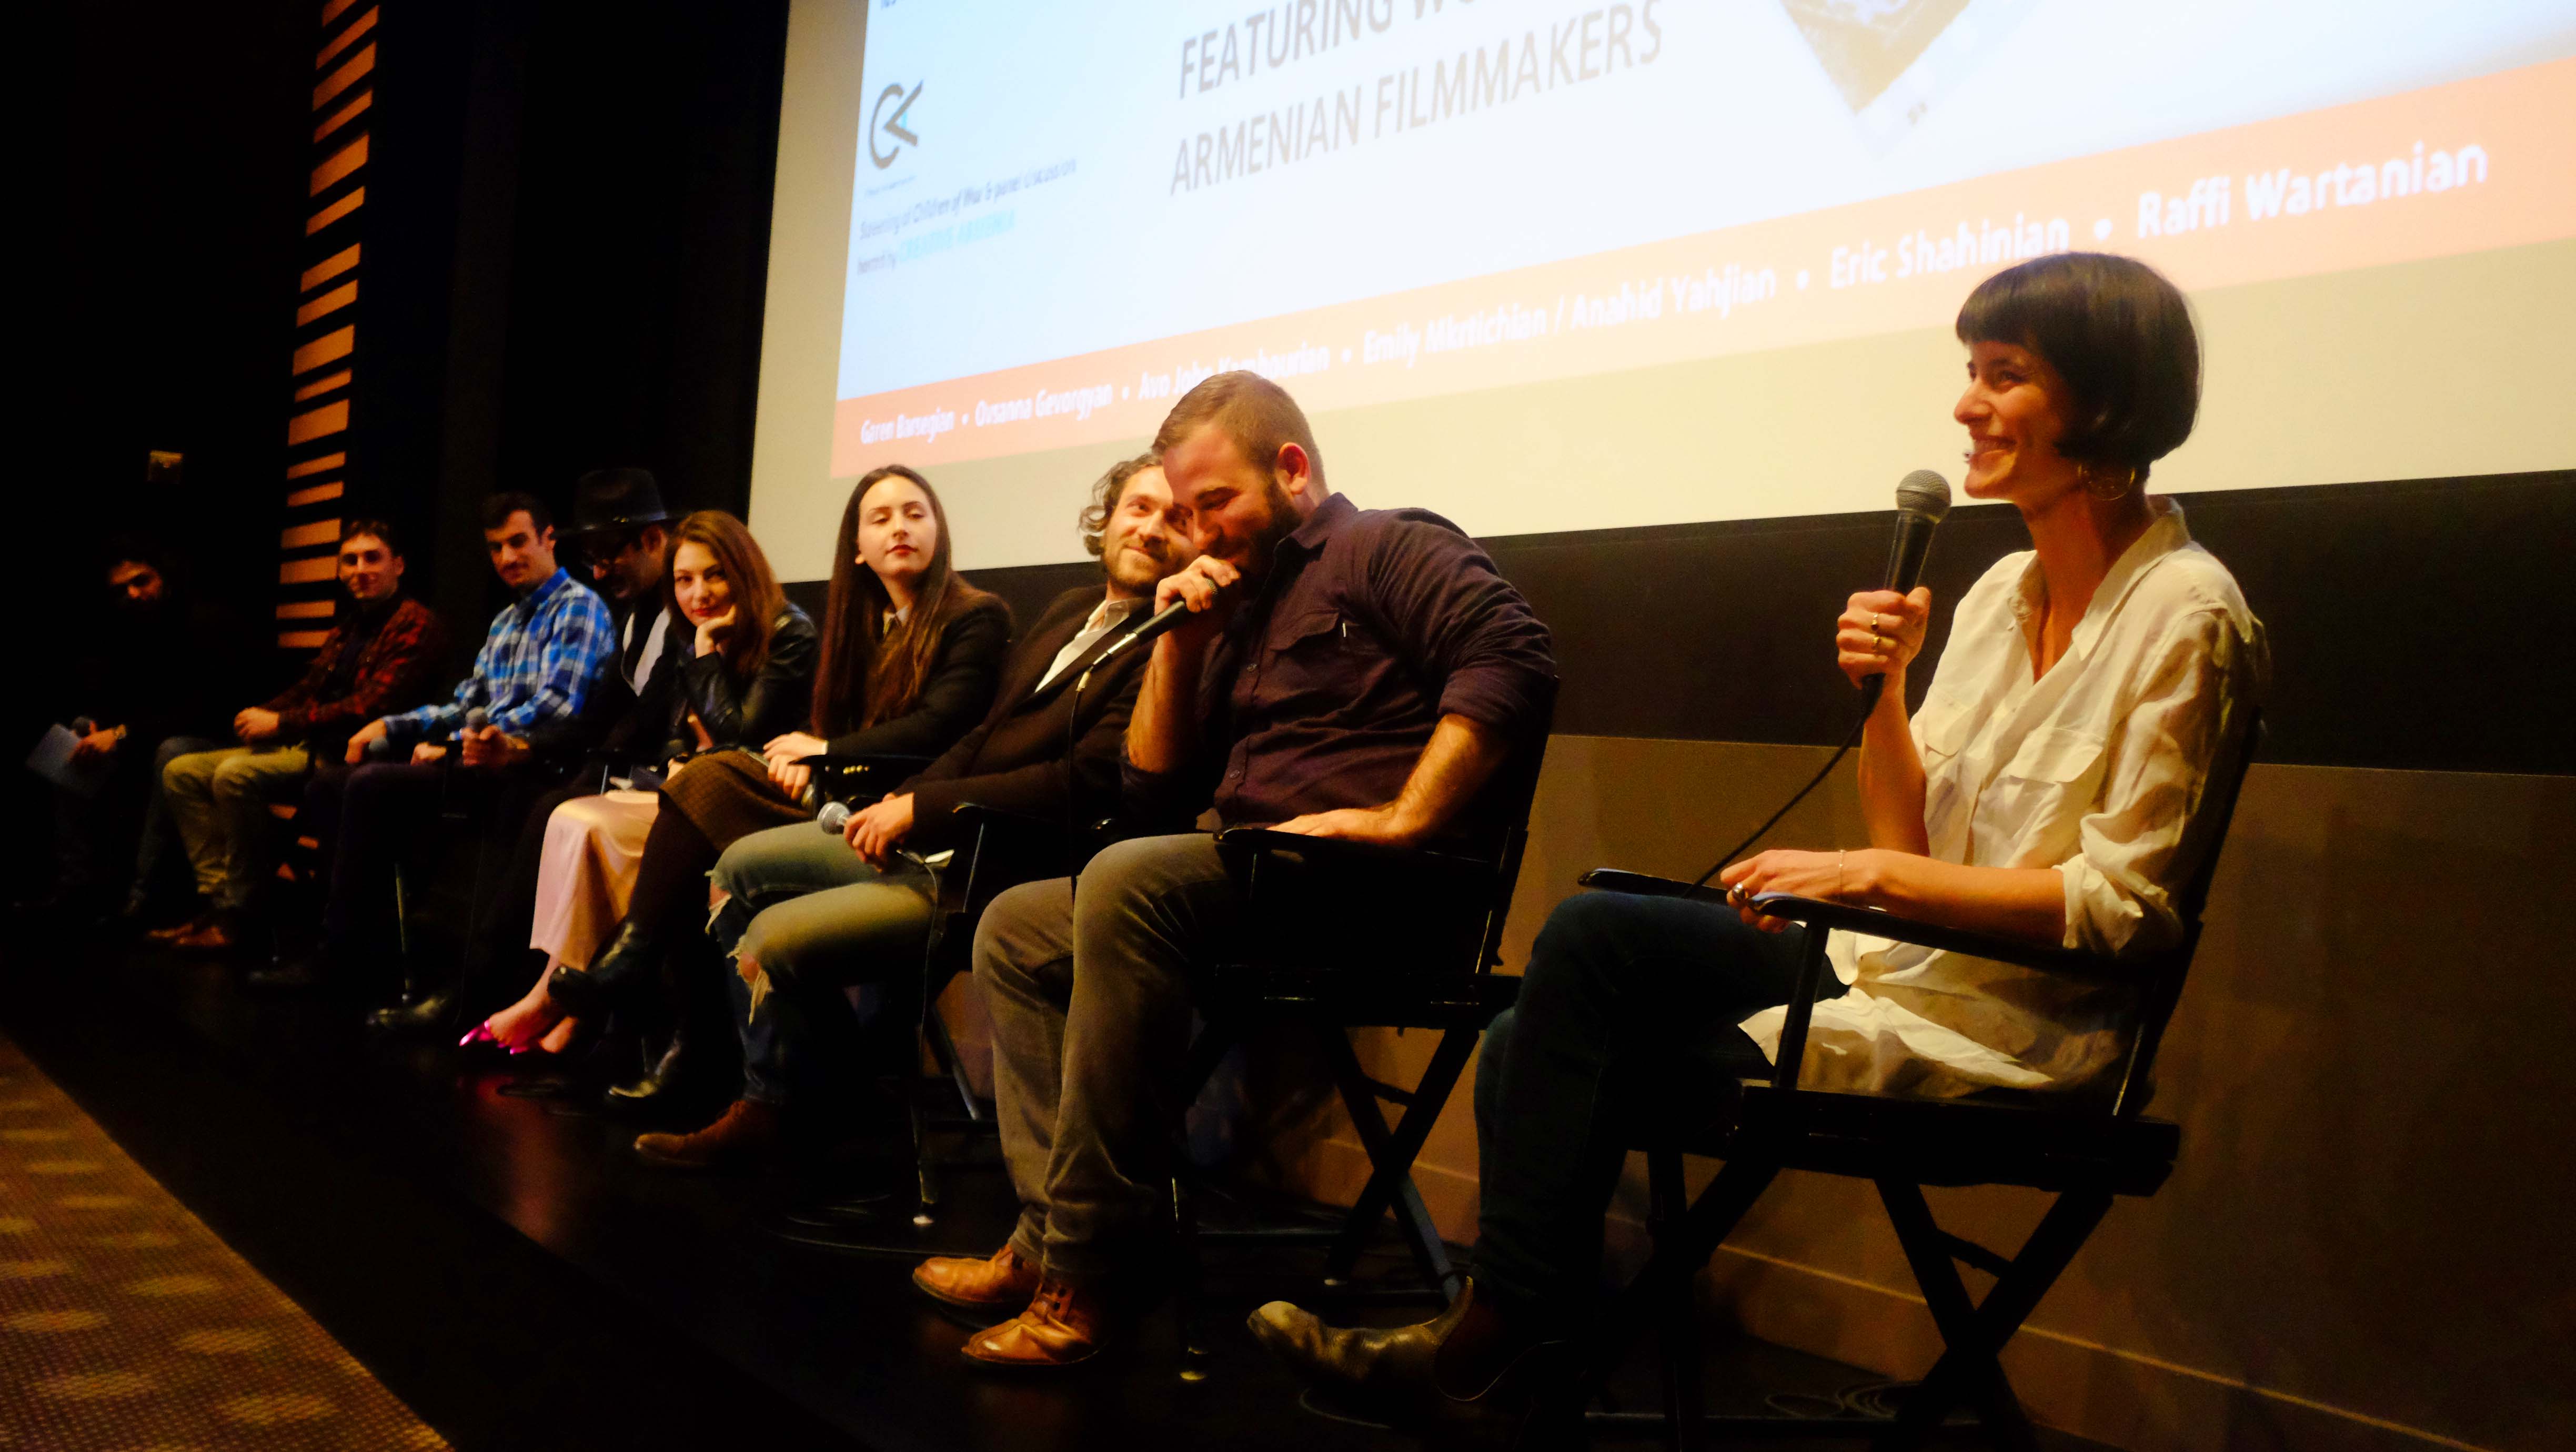 AGBU held annual film screening by Armenian filmmakers at Lincoln center